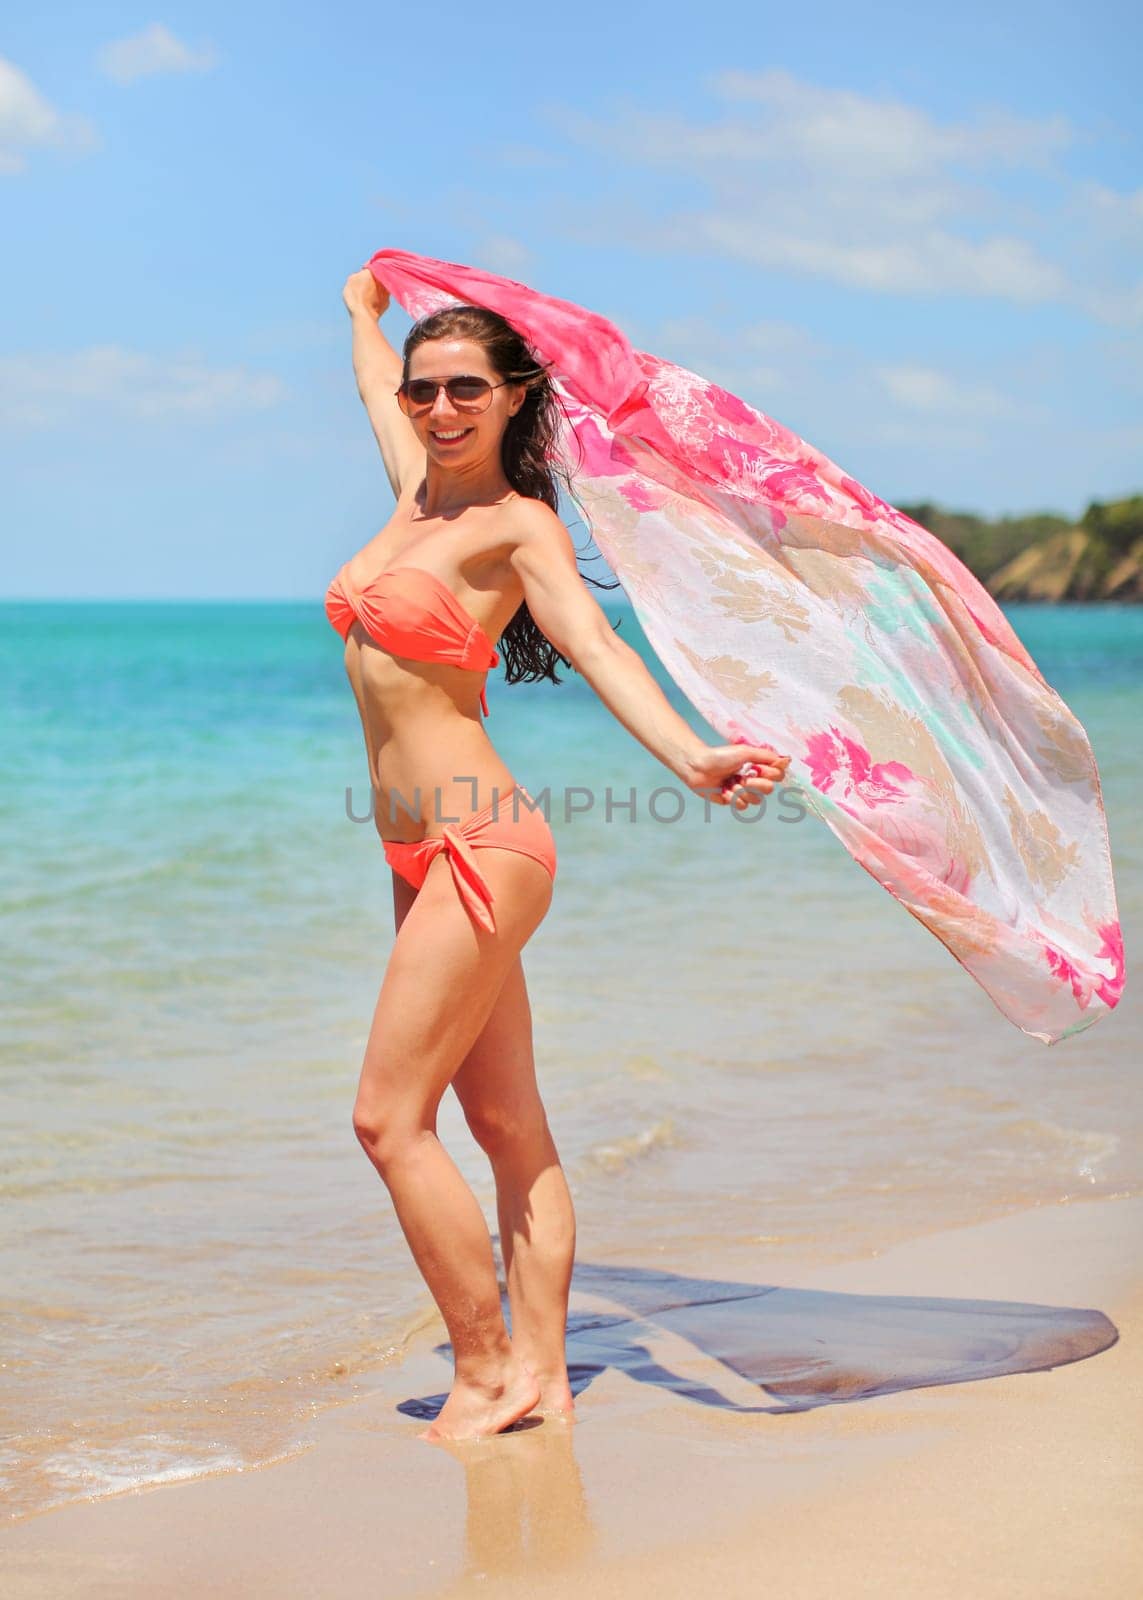 Young athletic slim woman in orange bikini and sunglasses stands on the beach, holding scarf behind her that is waving in the wind, azure sea background. by Ivanko